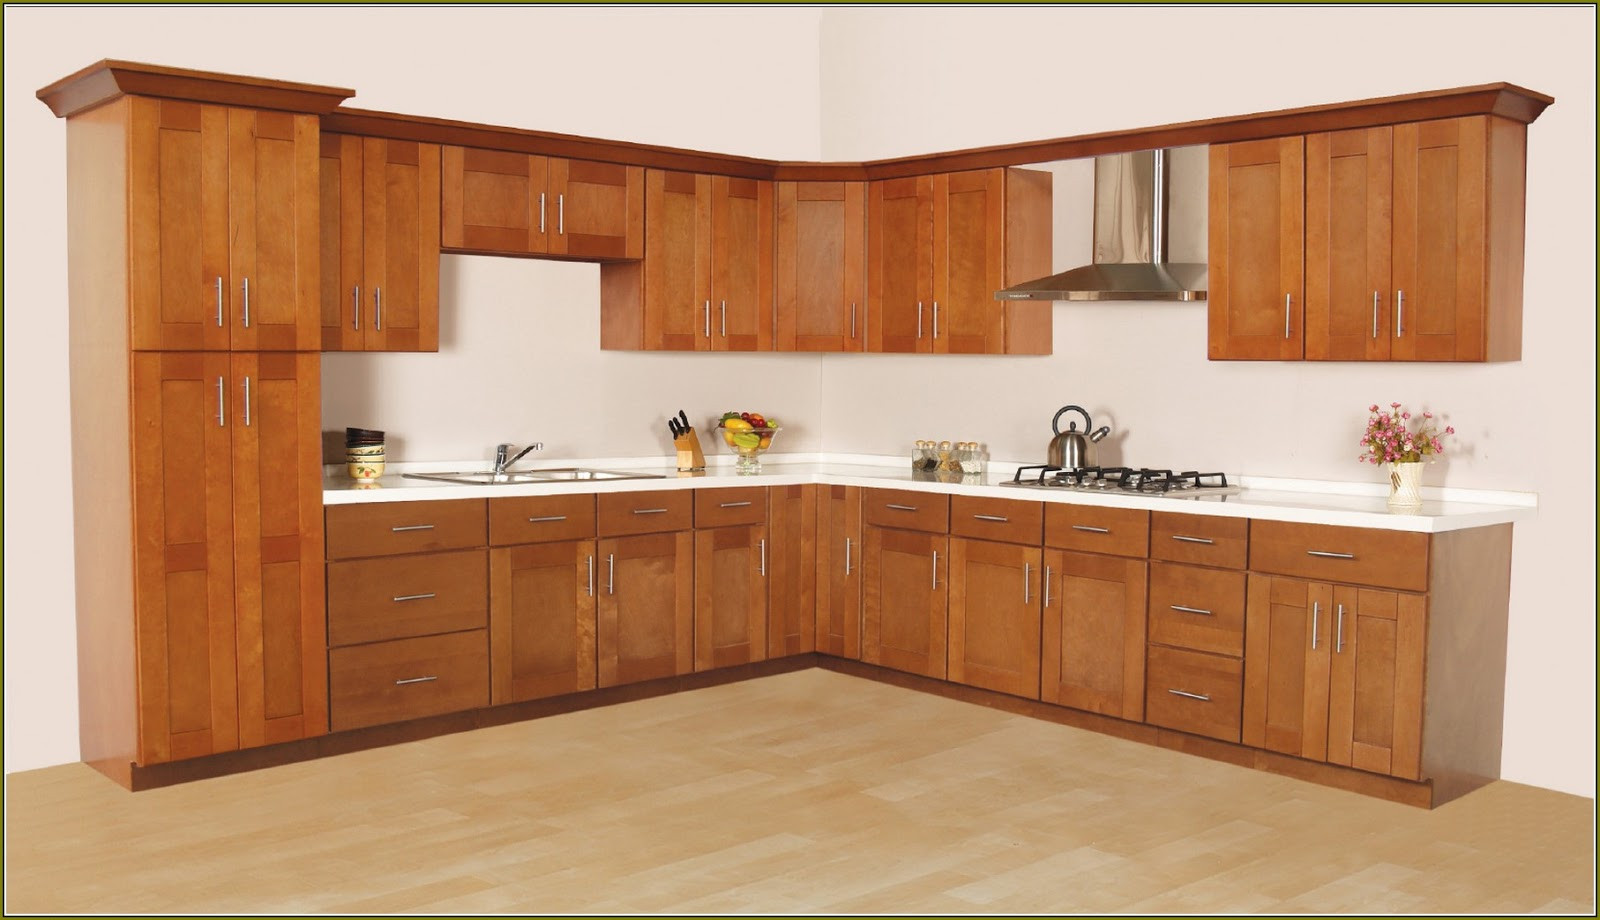 Lowes Unfinished Kitchen Cabinets
 How to Stain Unfinished Cabinets from Lowes